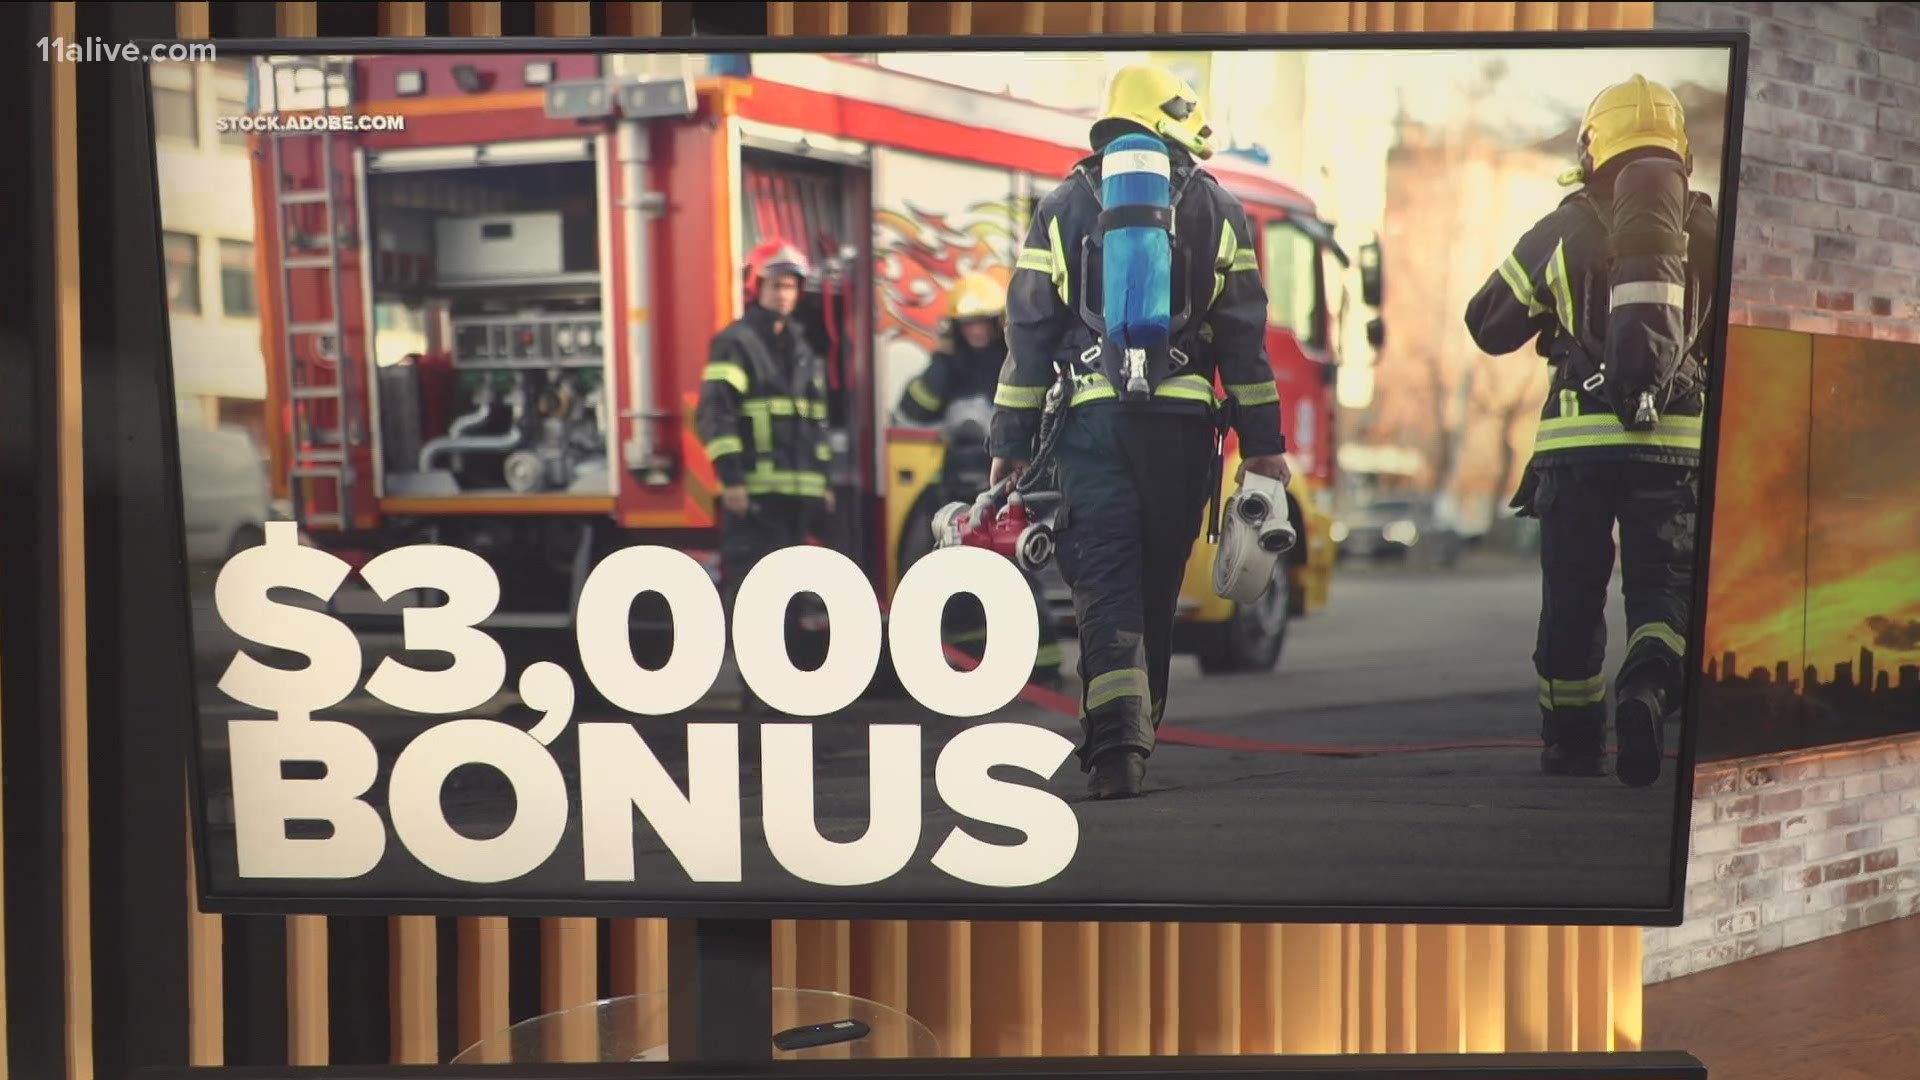 The bonus will be $3,000 and is for police officers, firefighters, 911 employees, and more.